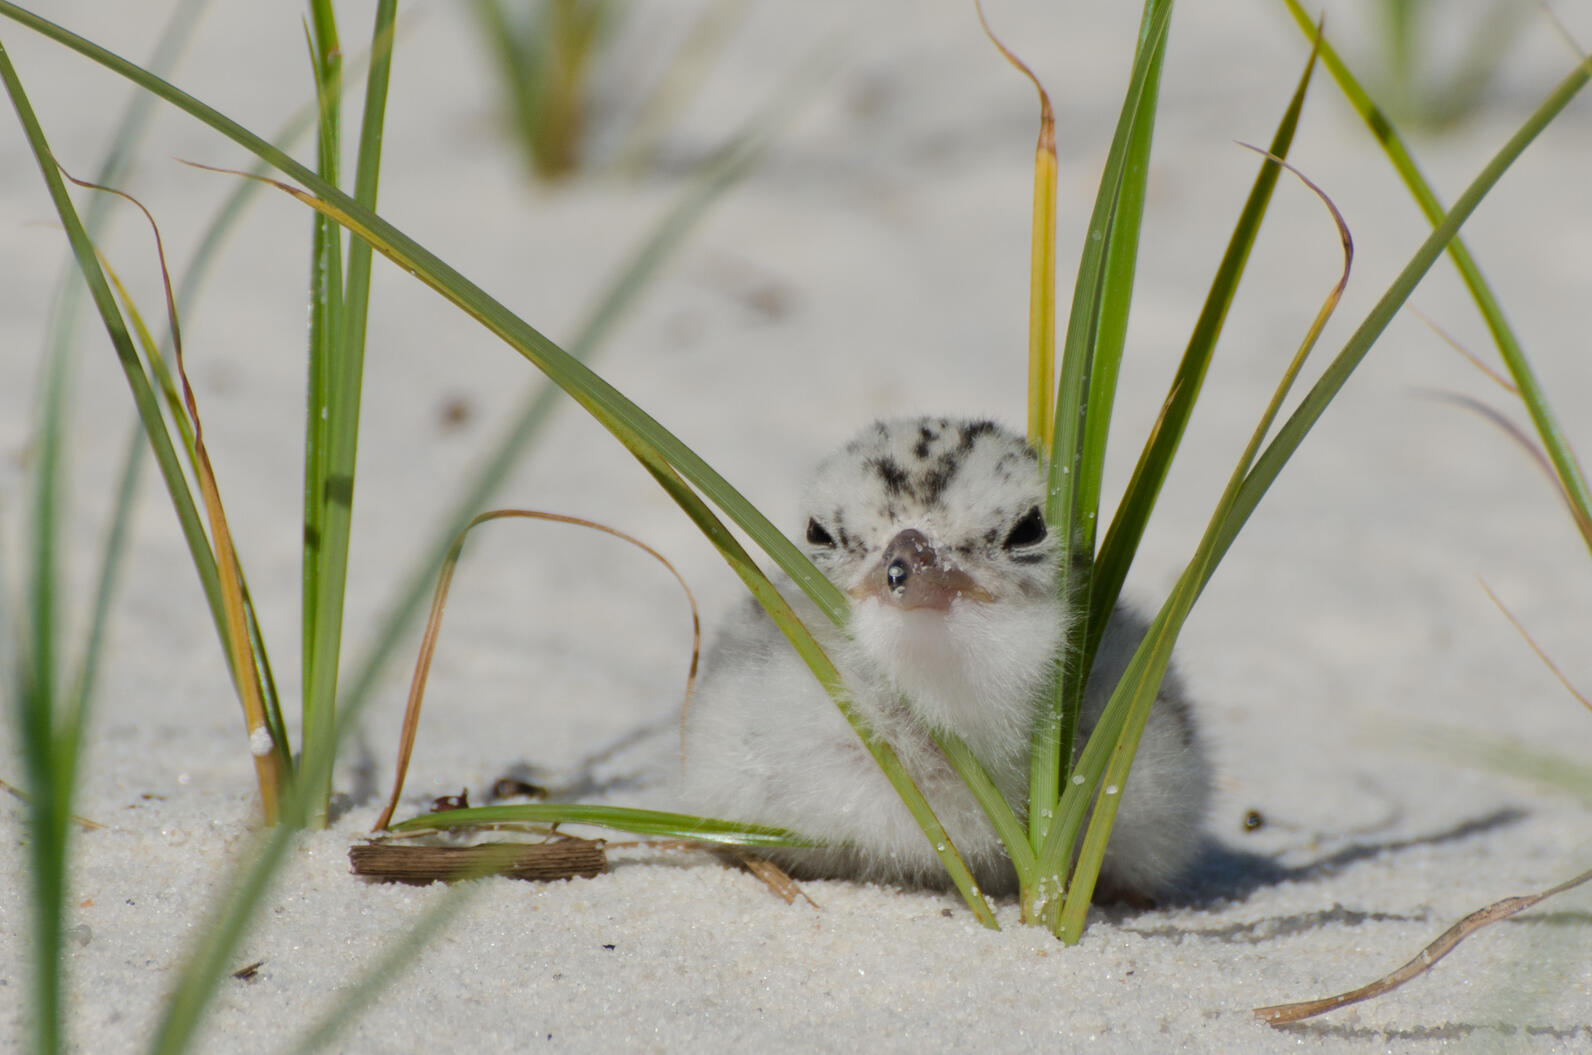 A Least Tern chick rests it's head in between blades of grass on a white sand beach.